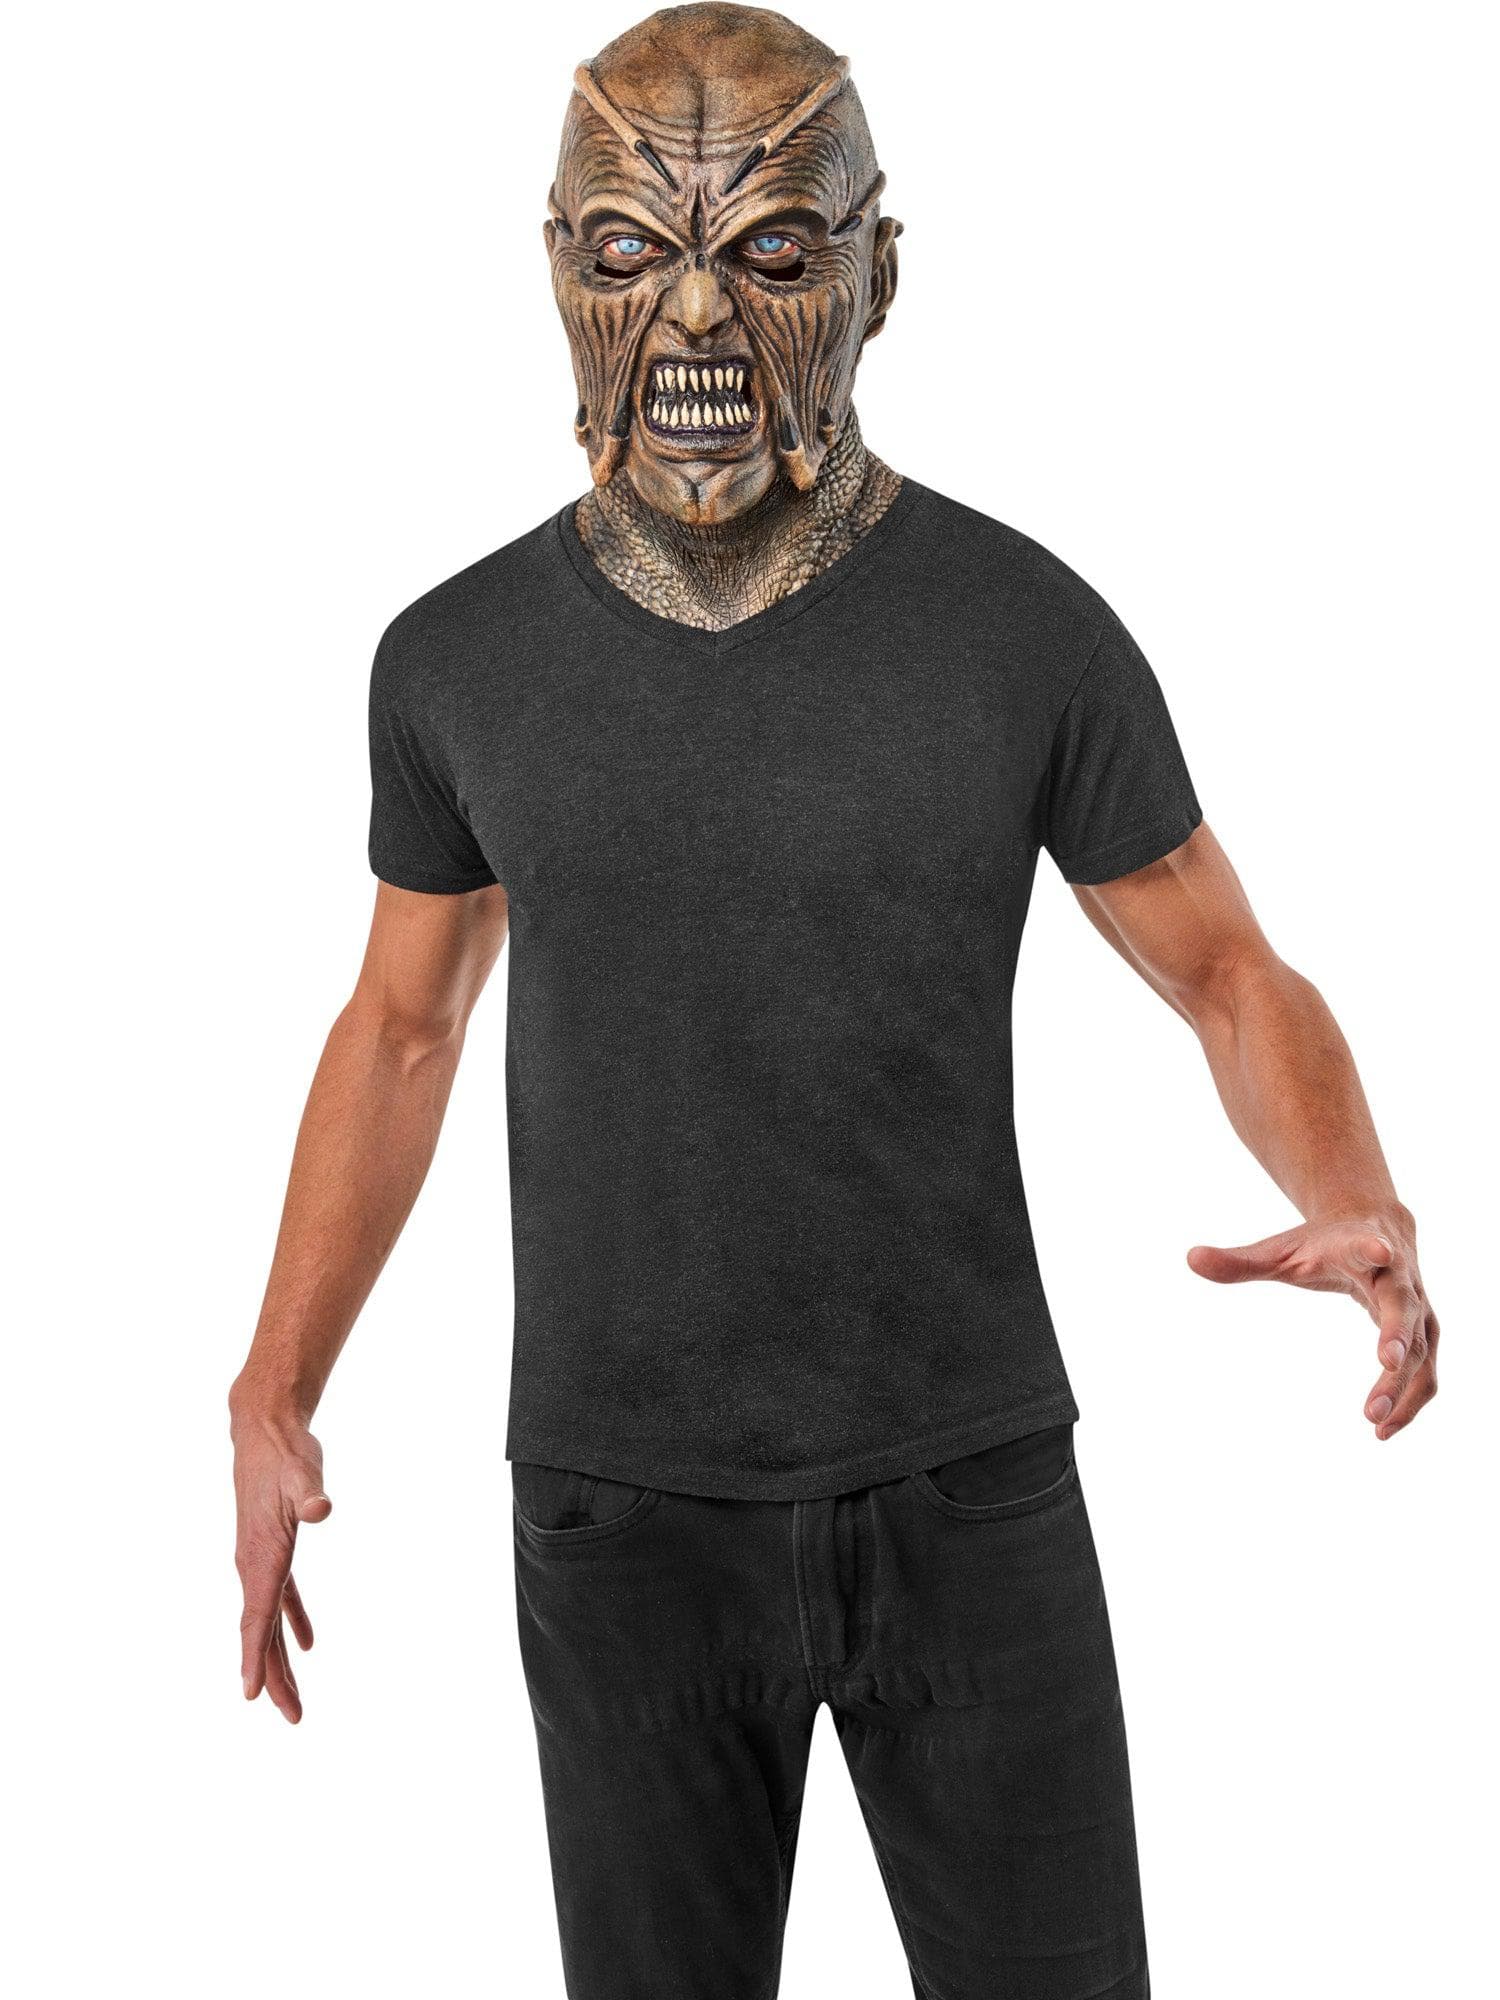 Adult Jeepers Creepers Overhead Latex Mask - costumes.com